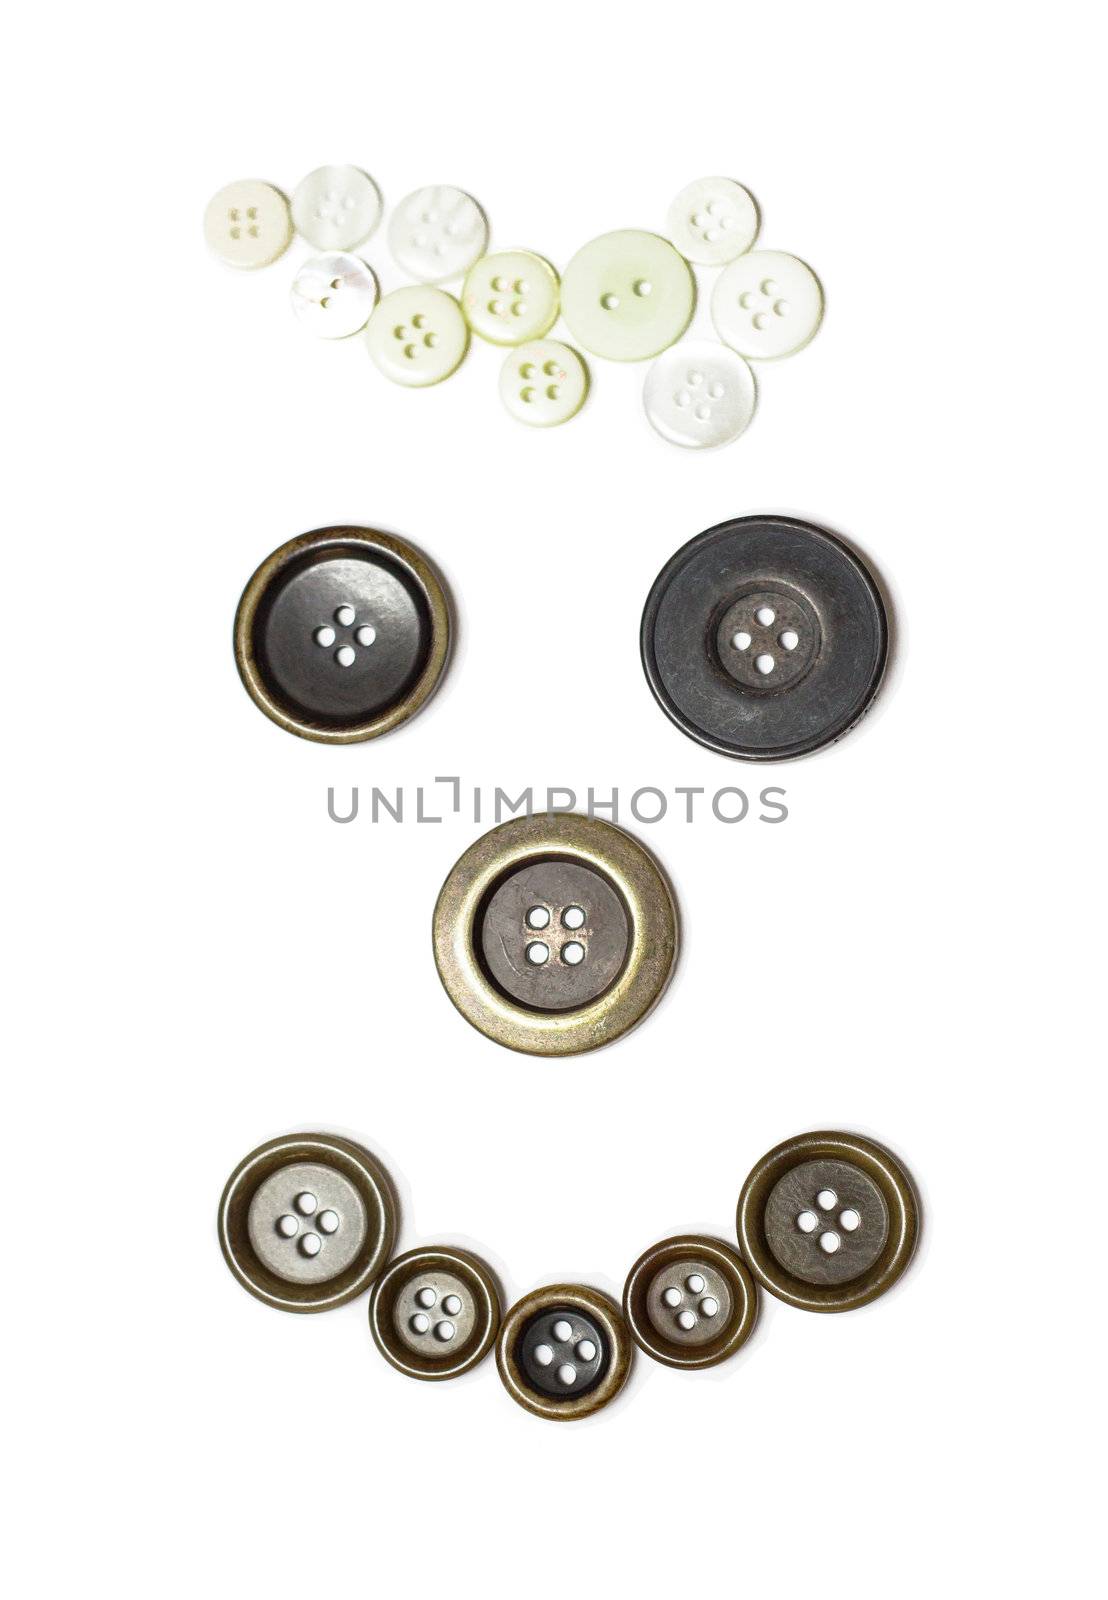 Smiling face buttons by doble.d